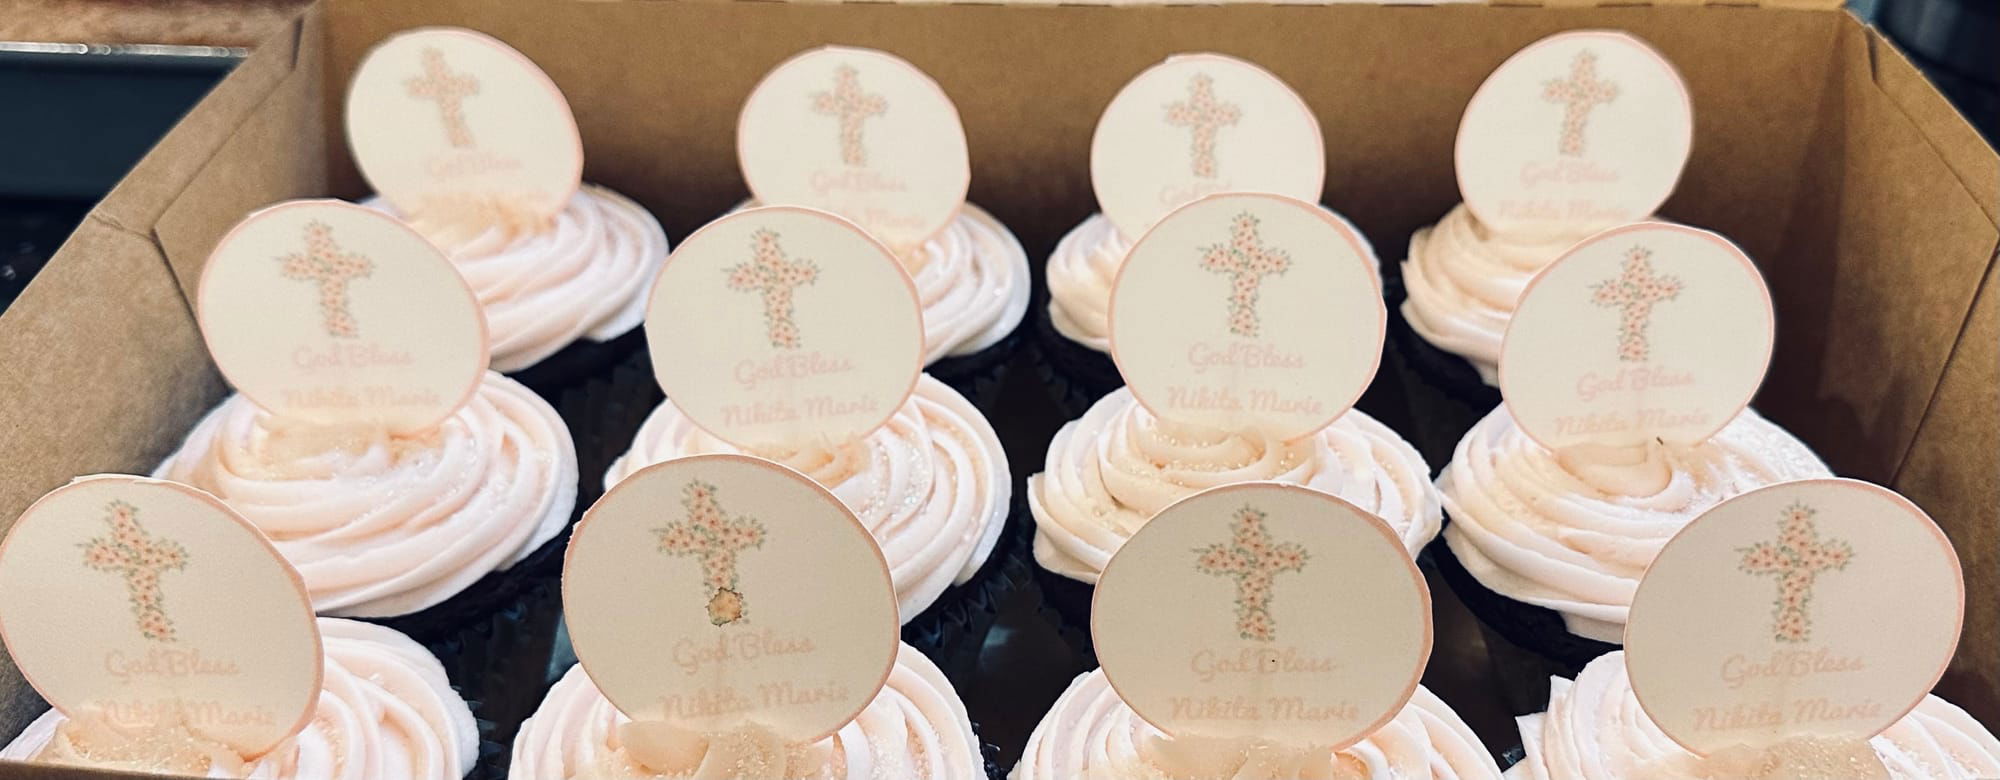 Chocolate Baptism Cupcakes with Buttercream Frosting